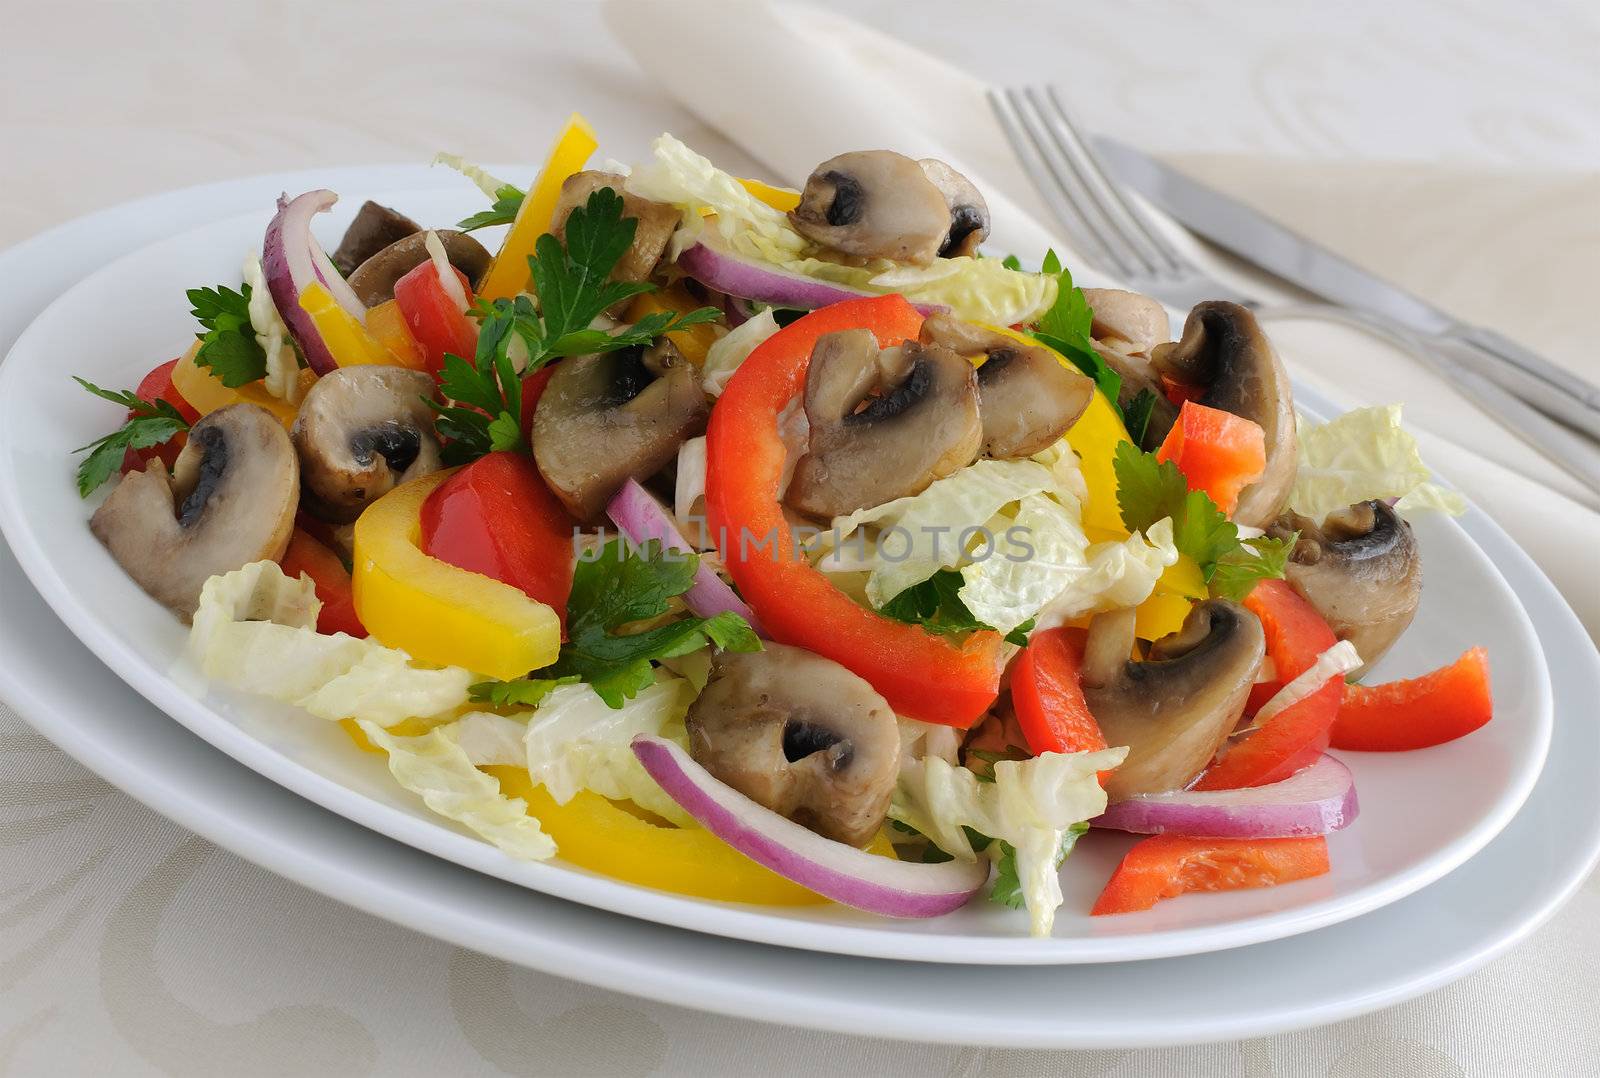 Cabbage salad with mushrooms and peppers